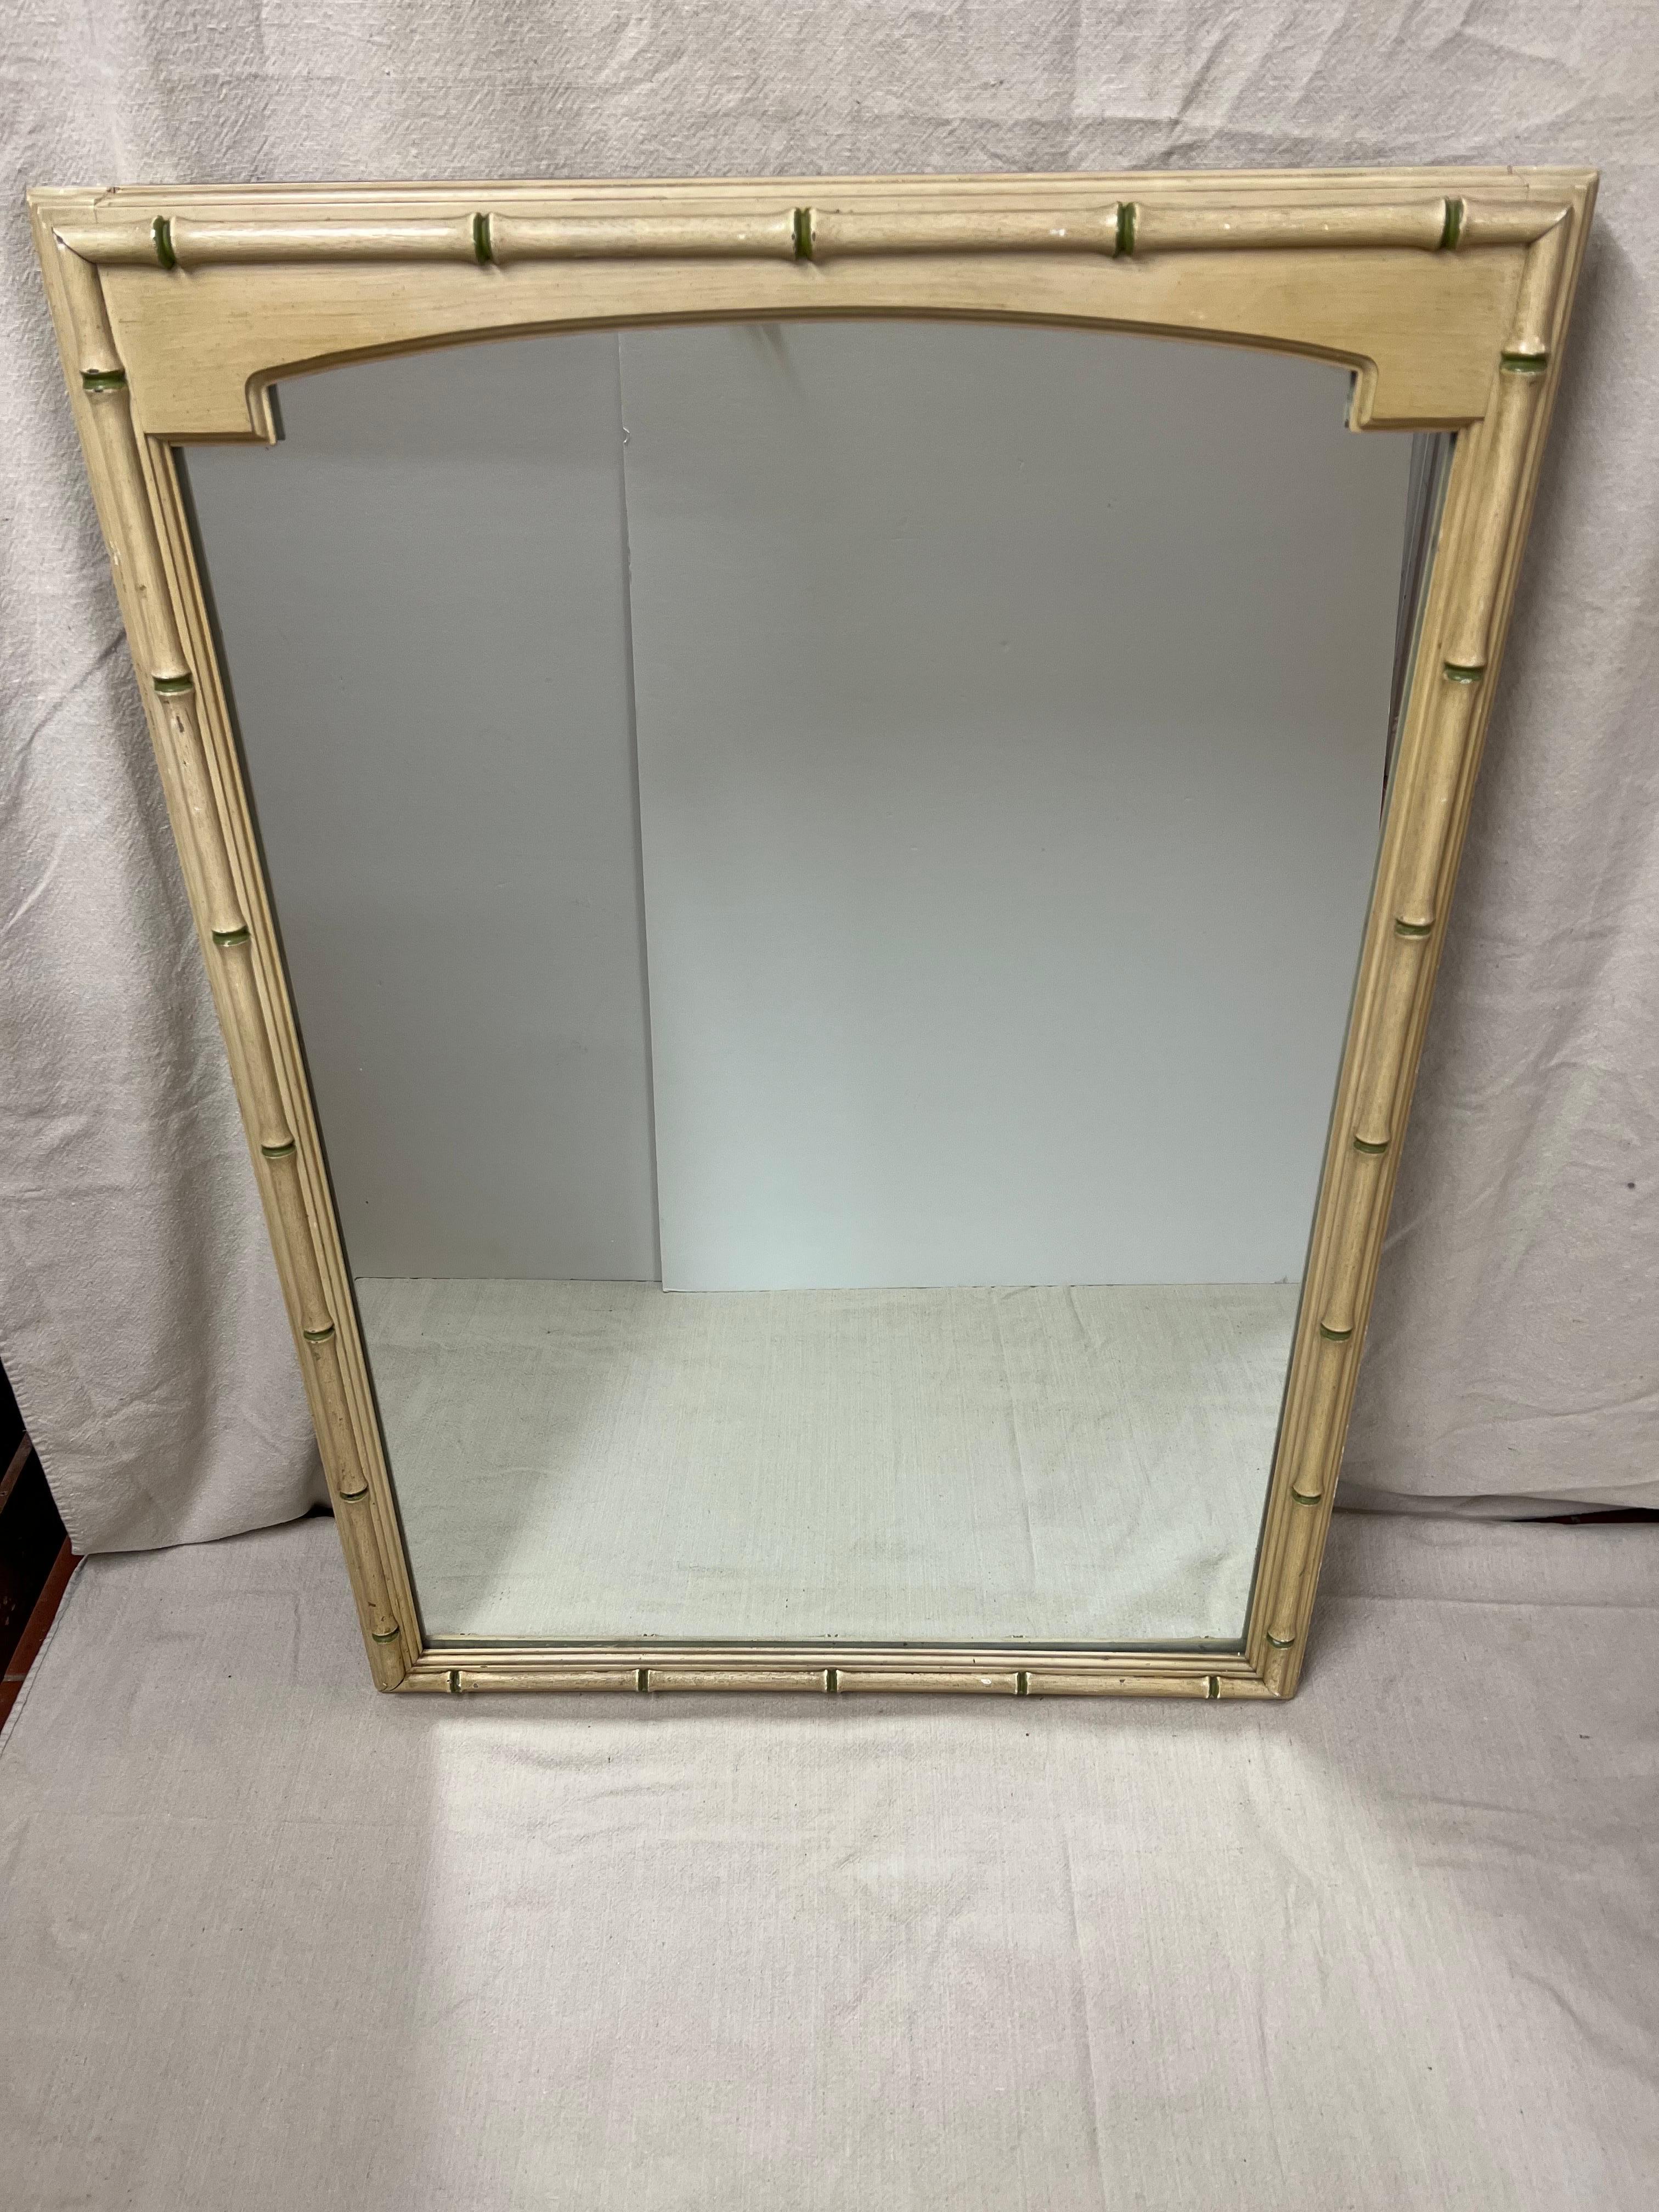 Thomasville allegro faux bamboo mirror. Nice pale creamy yellow with green highlights. 
Perfect for above a dresser or in a hallway. Heavy solid wooden construction.